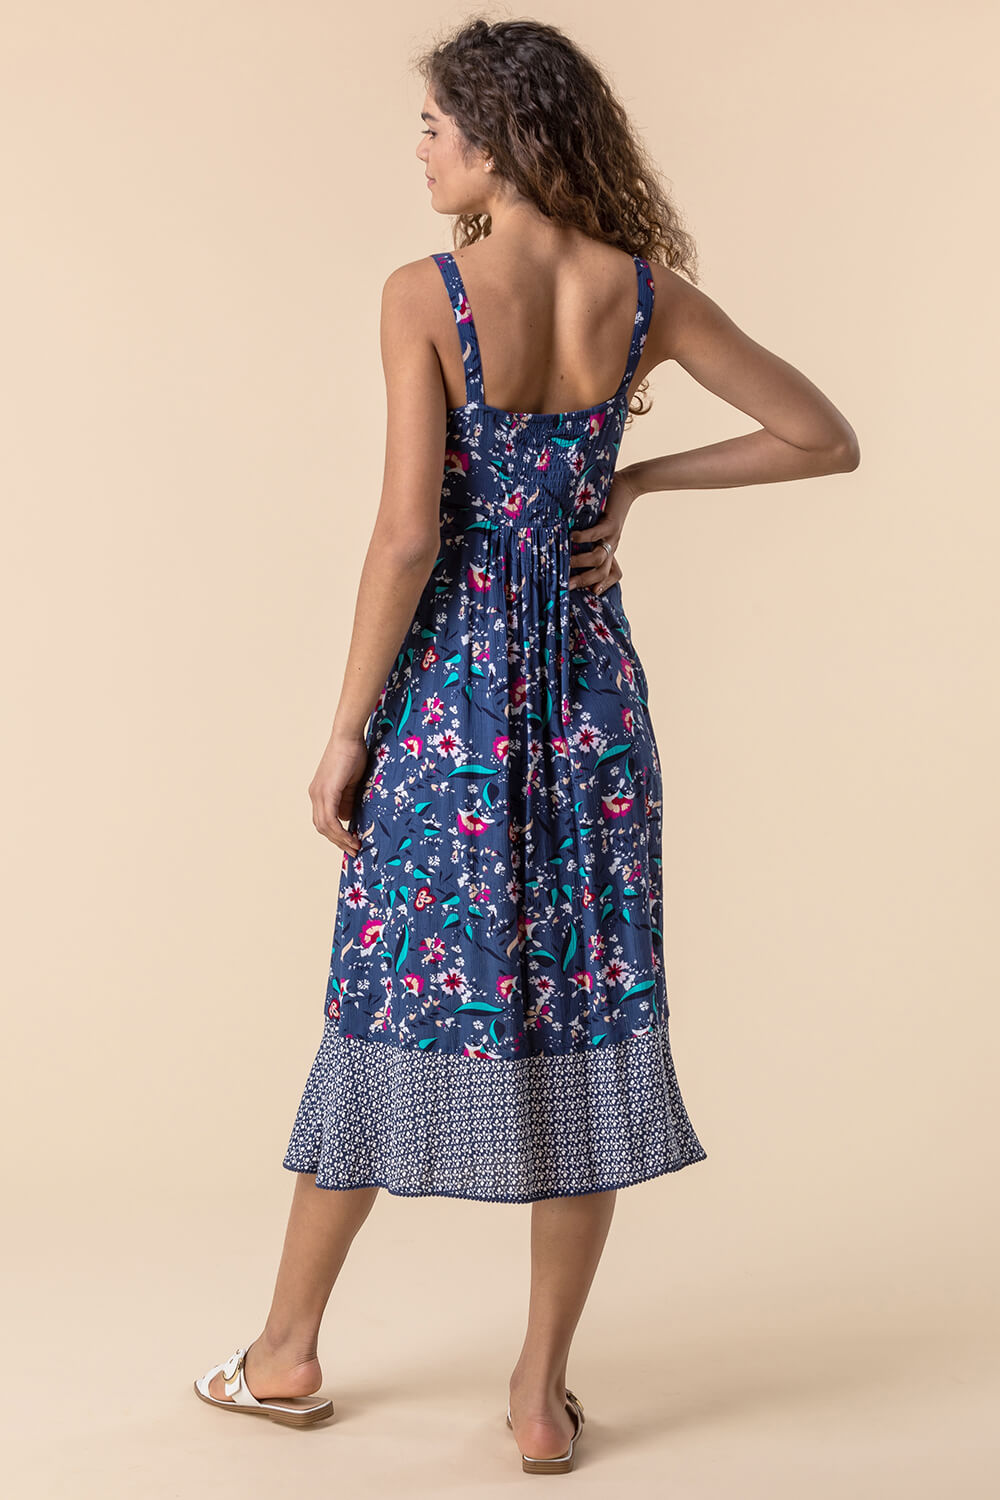  Geo Floral Print Strappy Sun Dress, Image 2 of 5